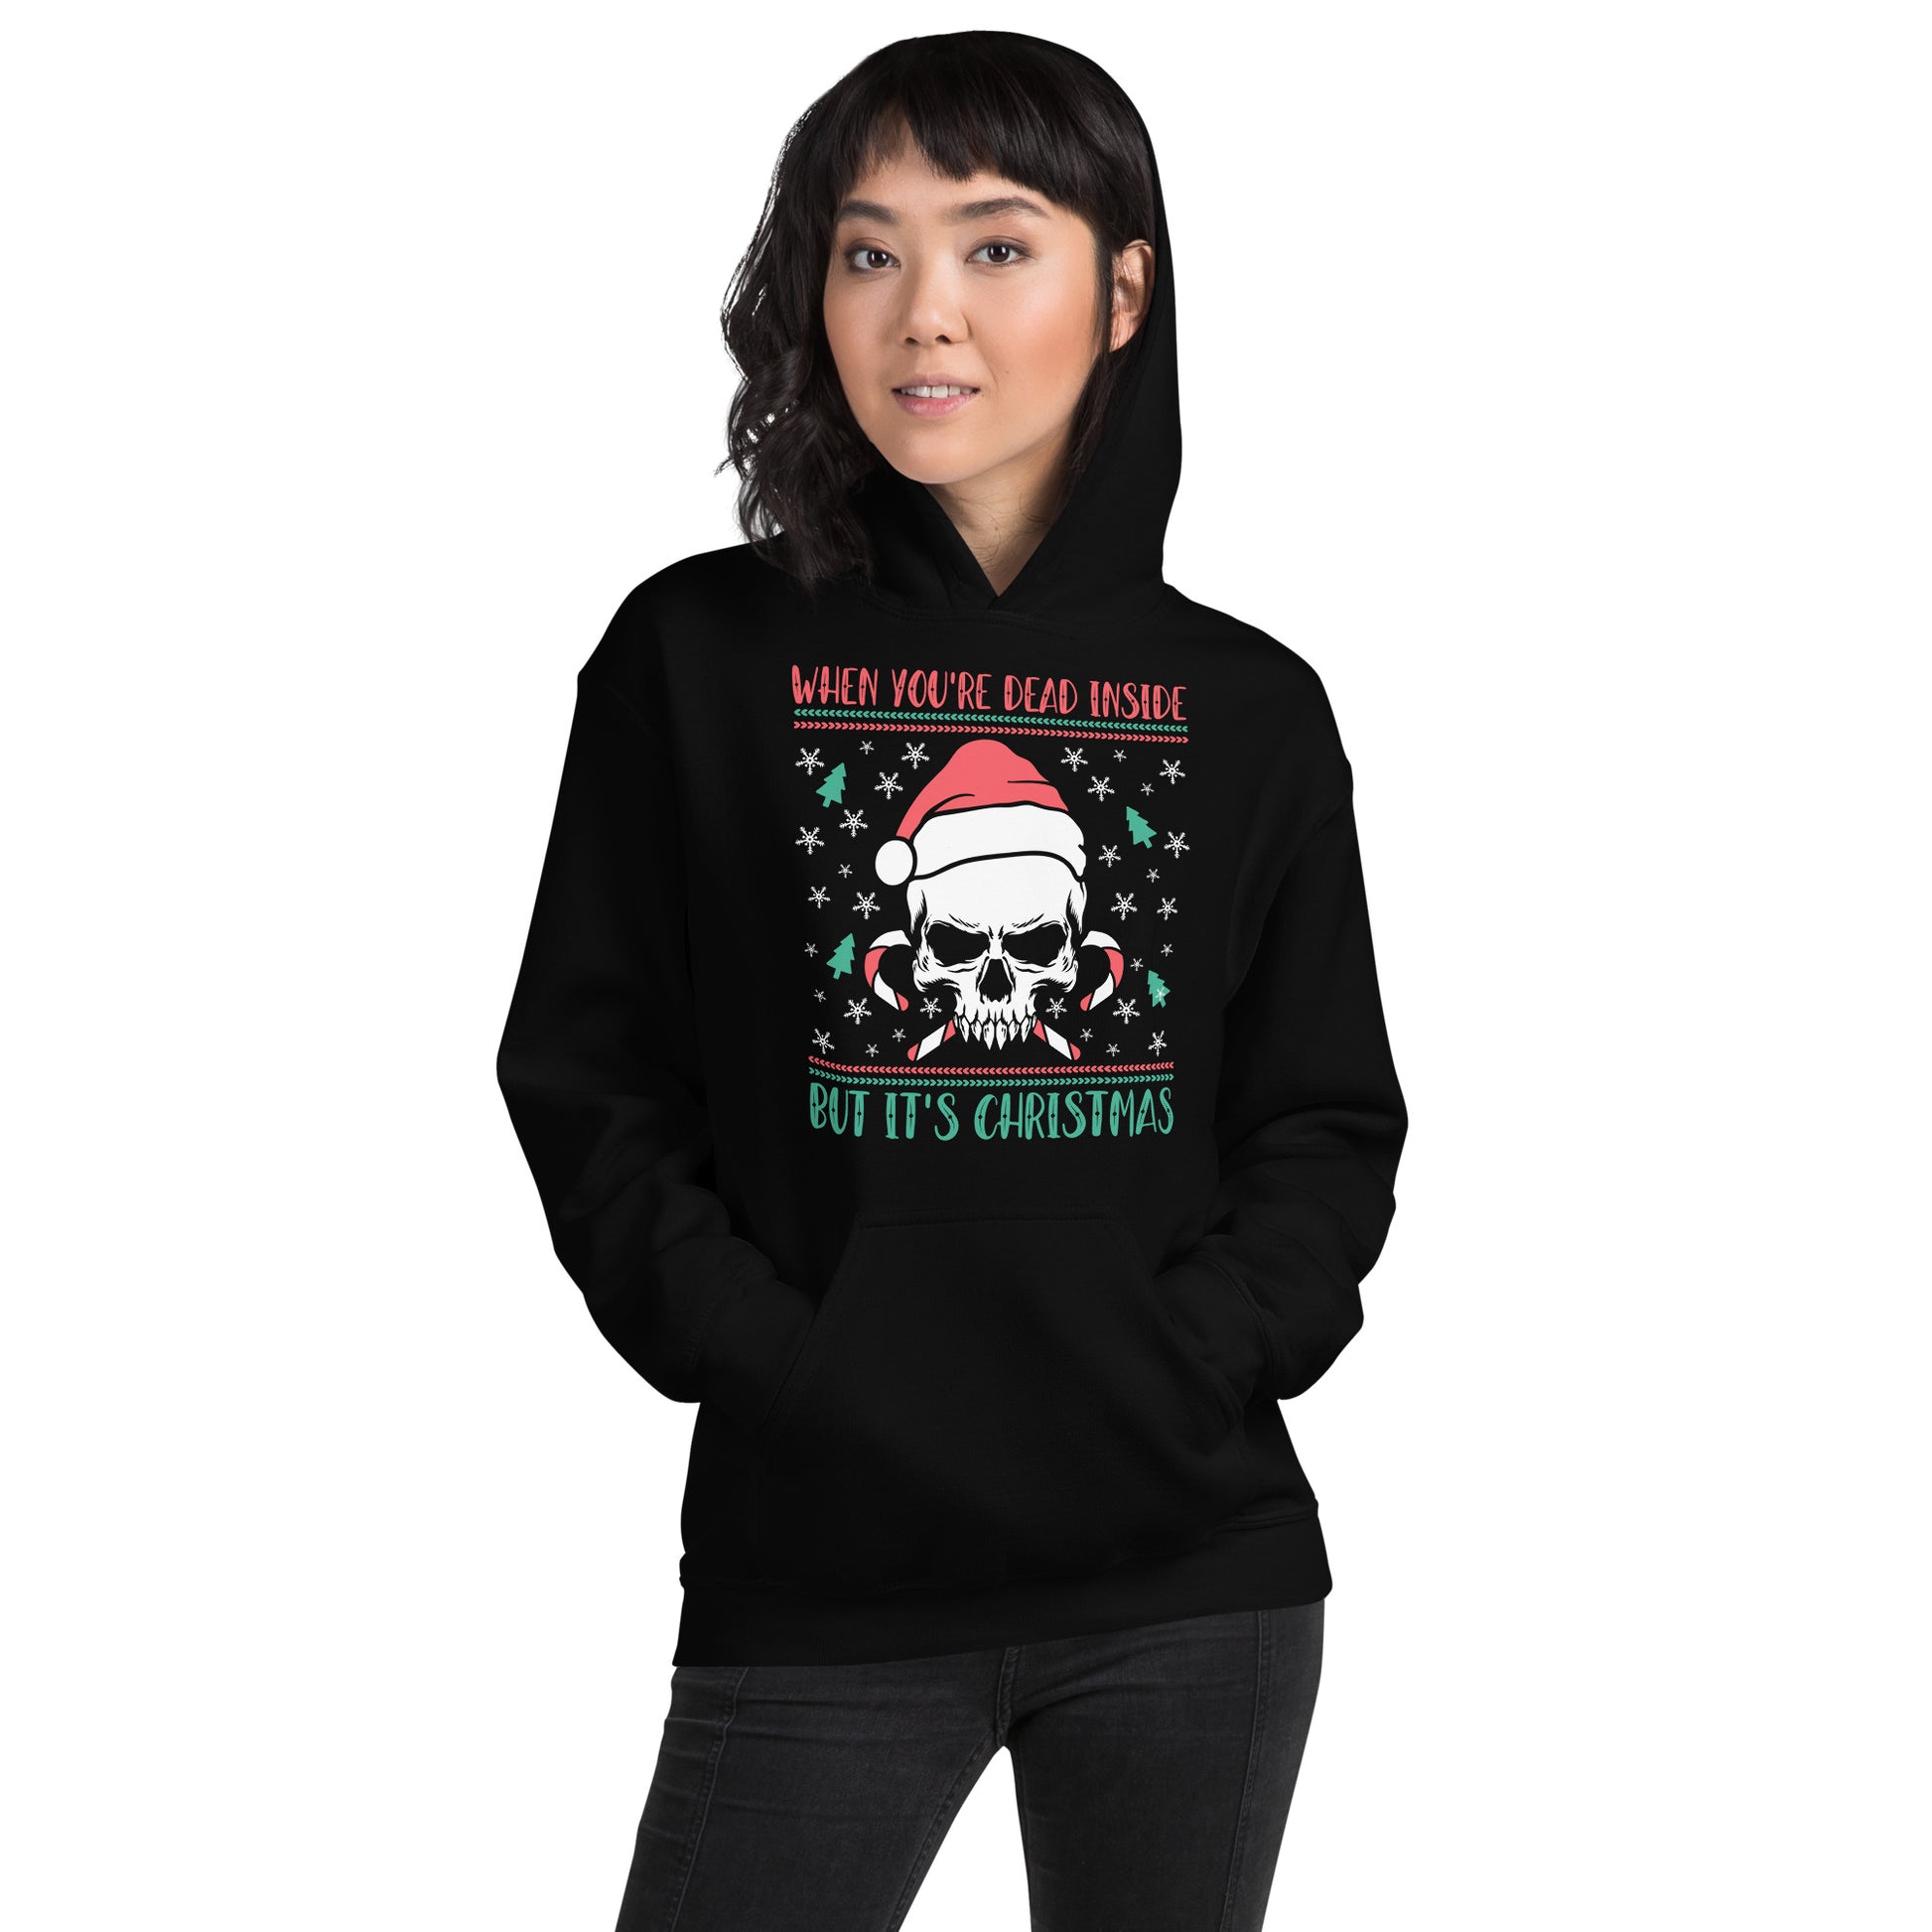 When You're Dead Inside But Its Christmas Hoodie on a woman